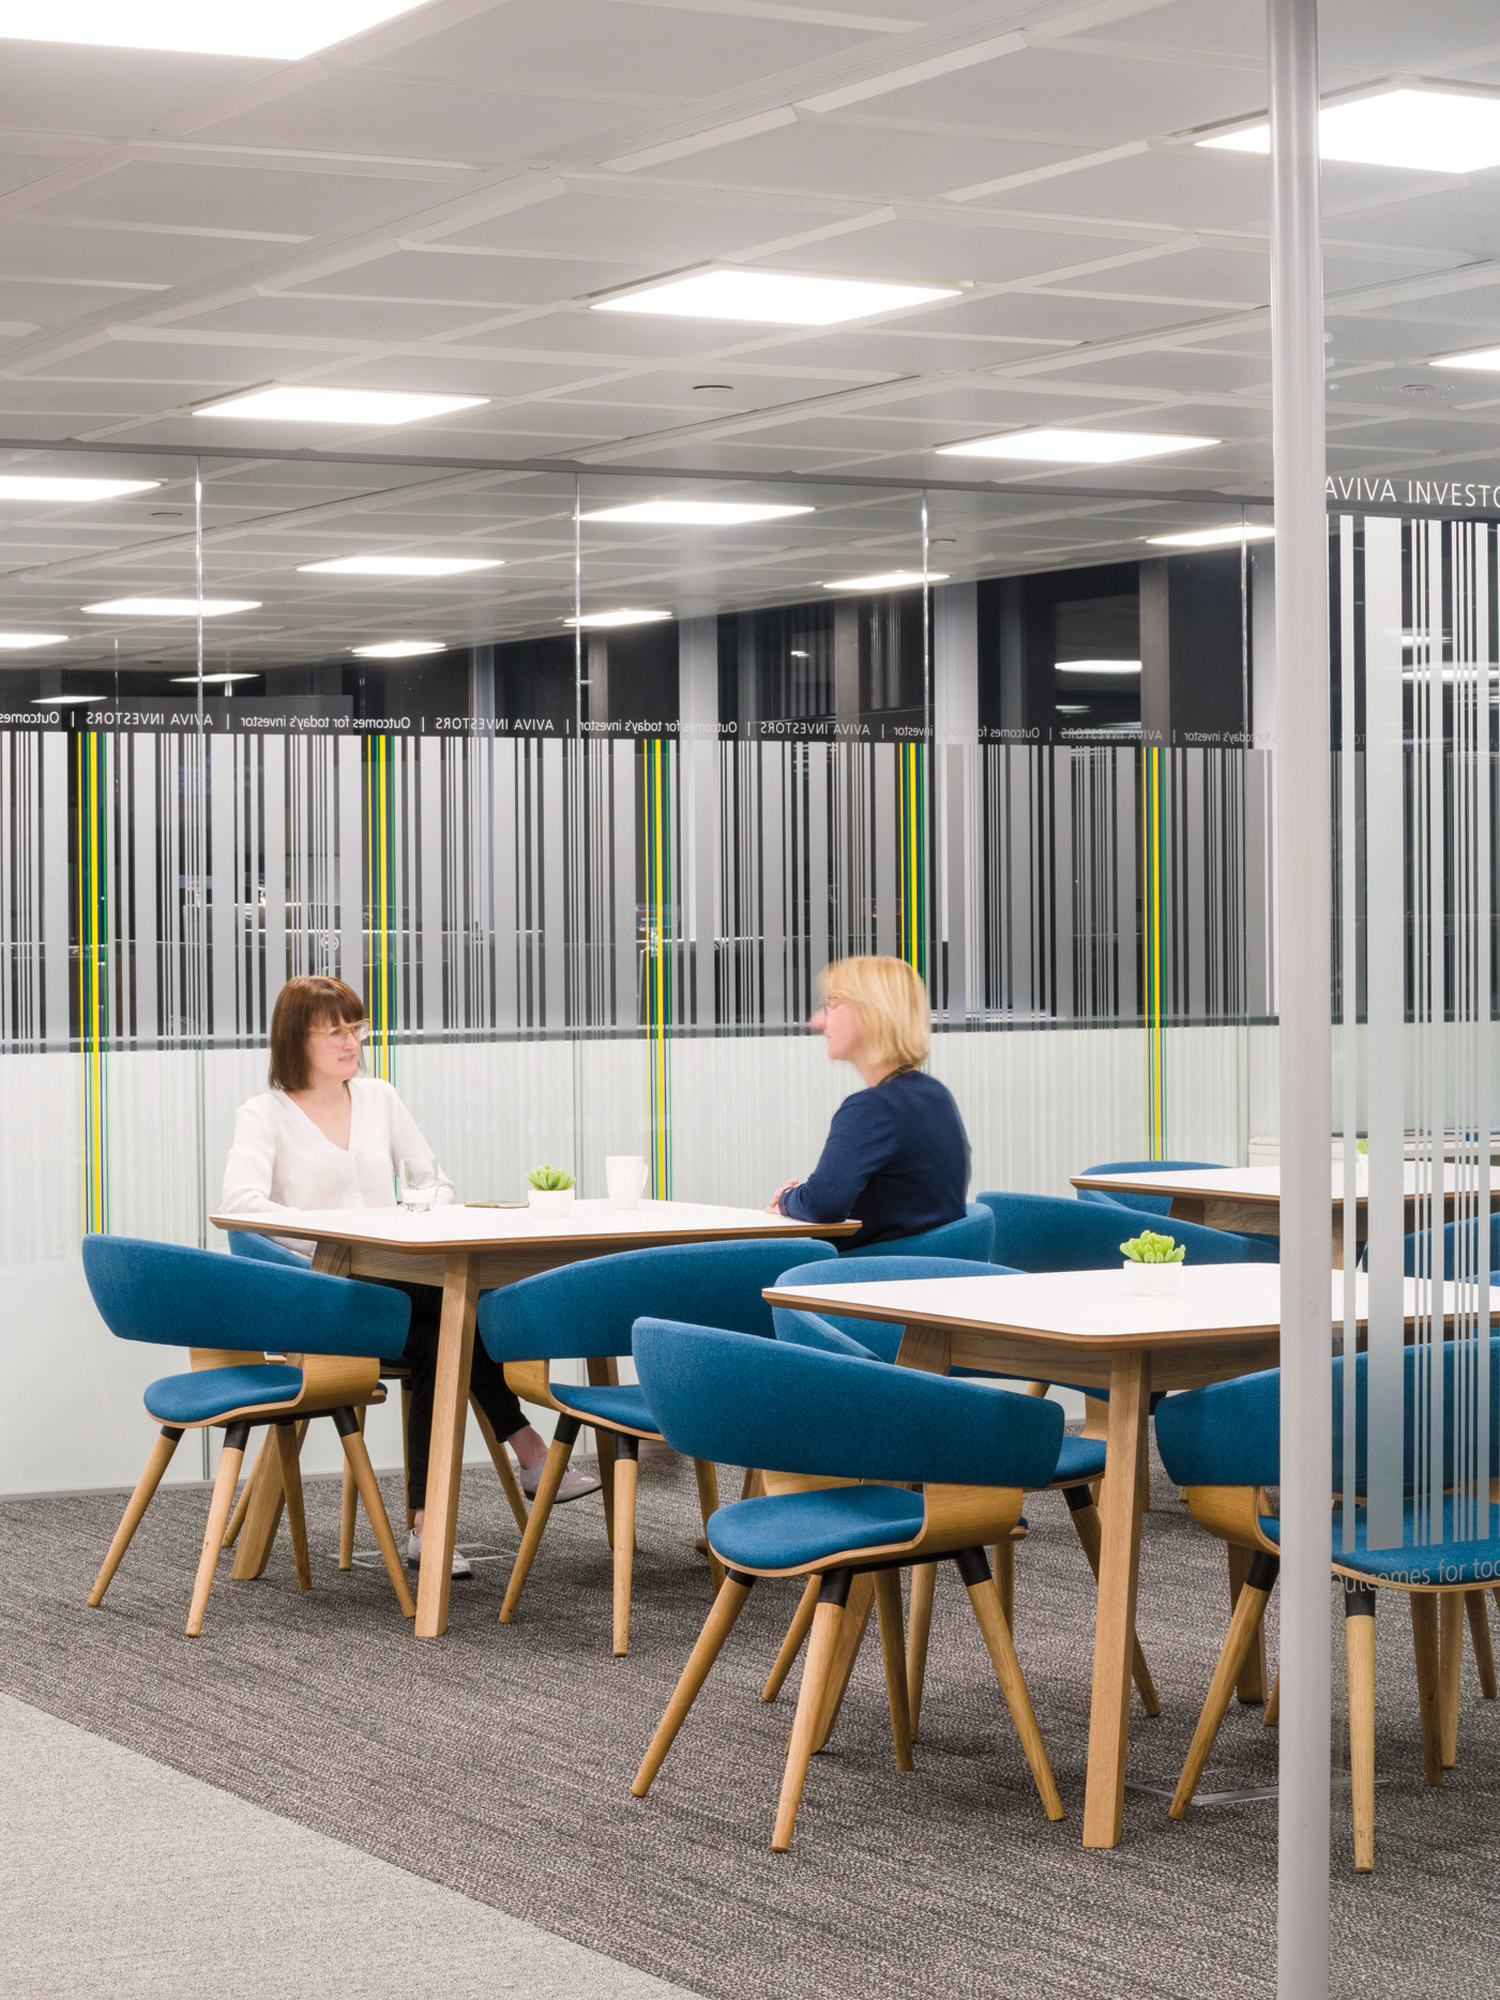 Modern office meeting area with a Scandinavian-inspired design, featuring sleek wooden furniture with blue upholstered chairs, set against a backdrop of translucent dividers with vibrant vertical accents.